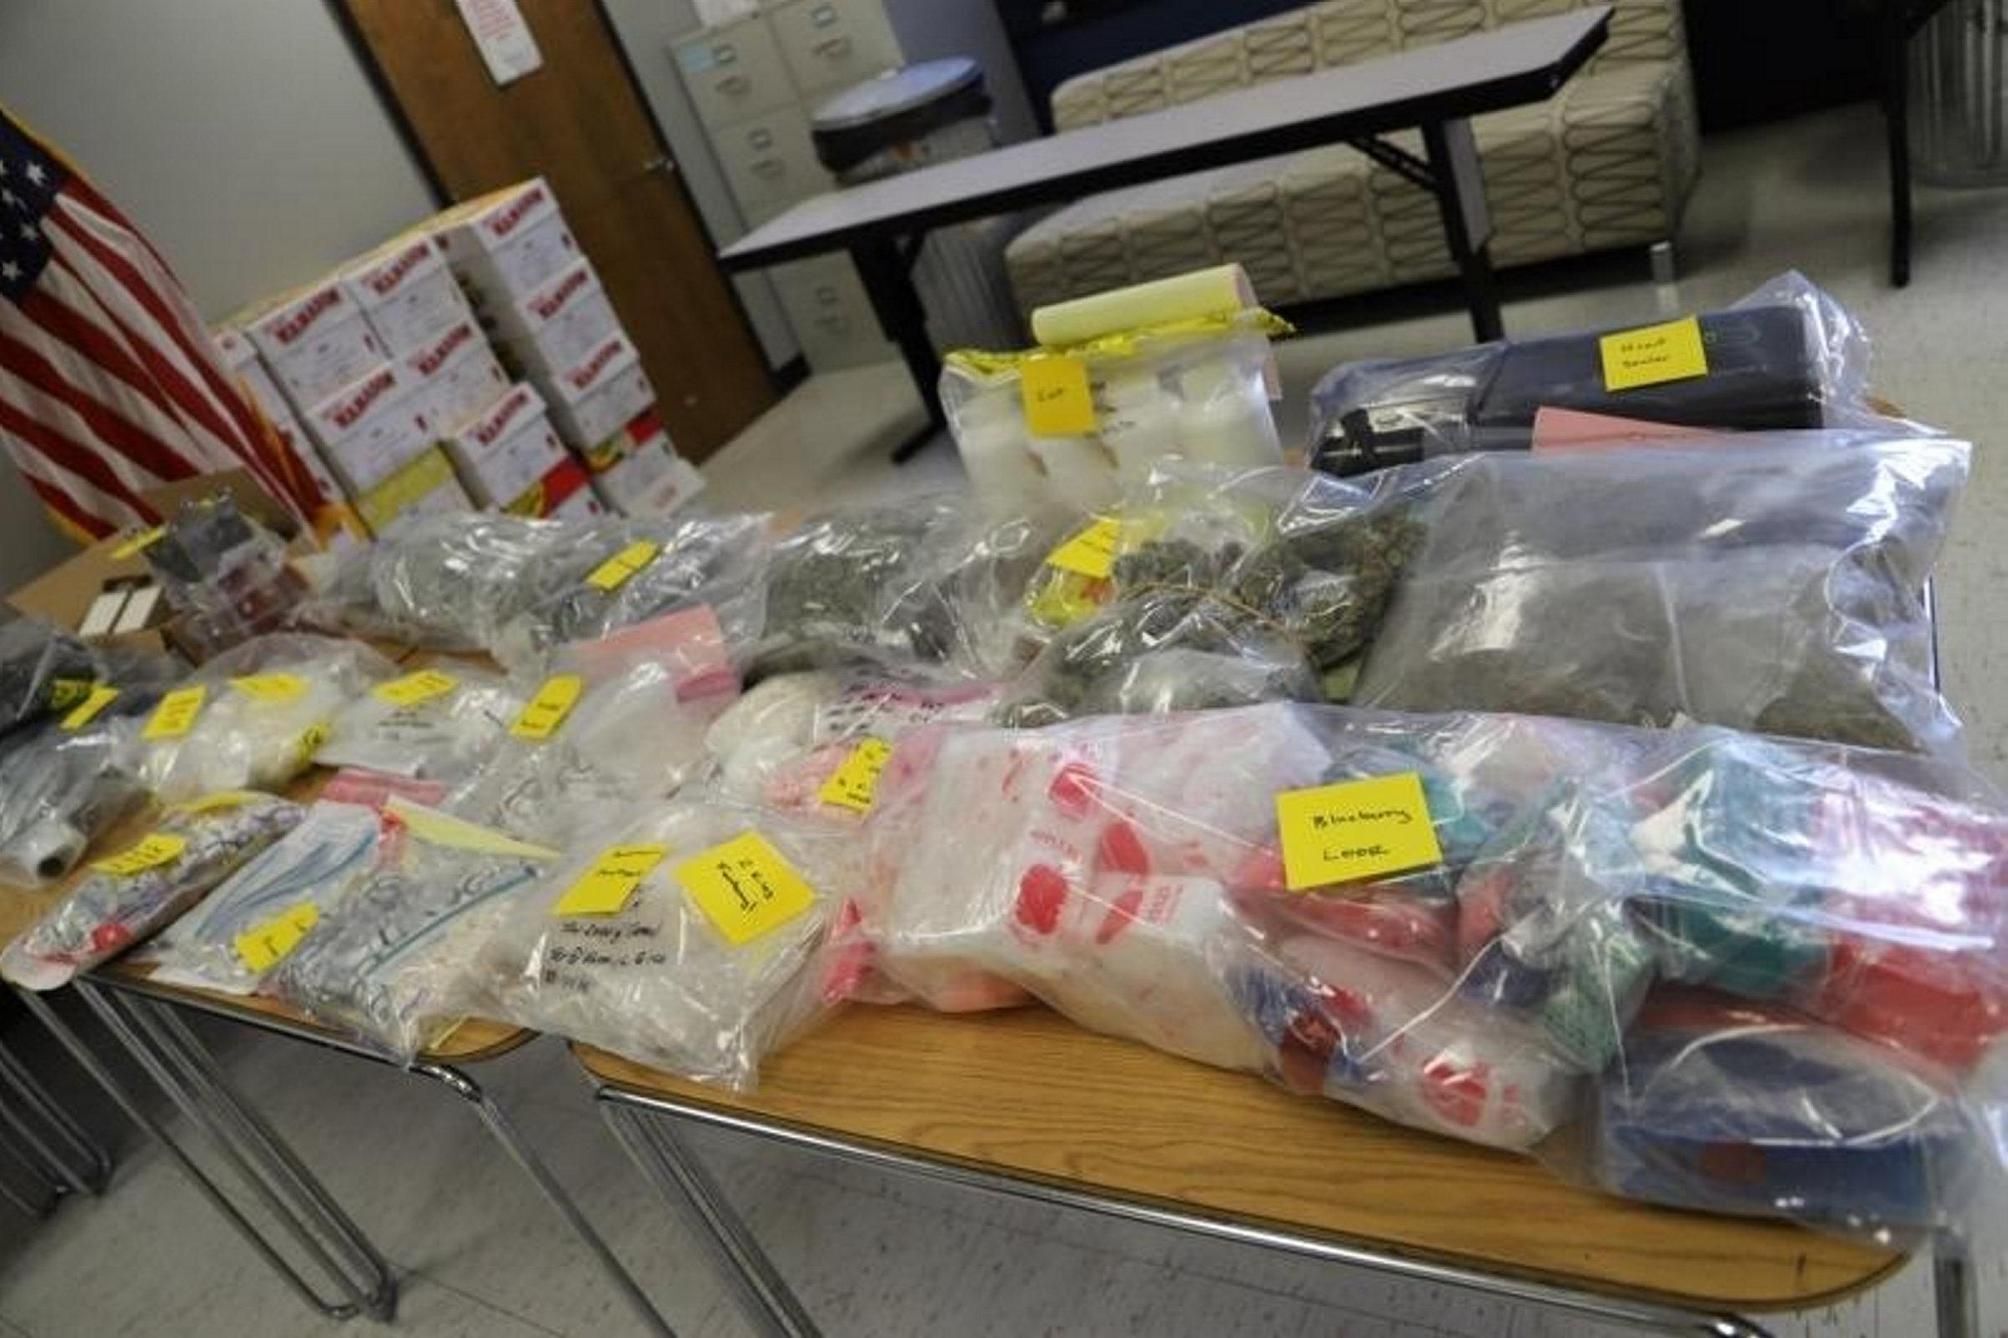 Suffolk Busts Alleged Drug and Money Laundering Ring